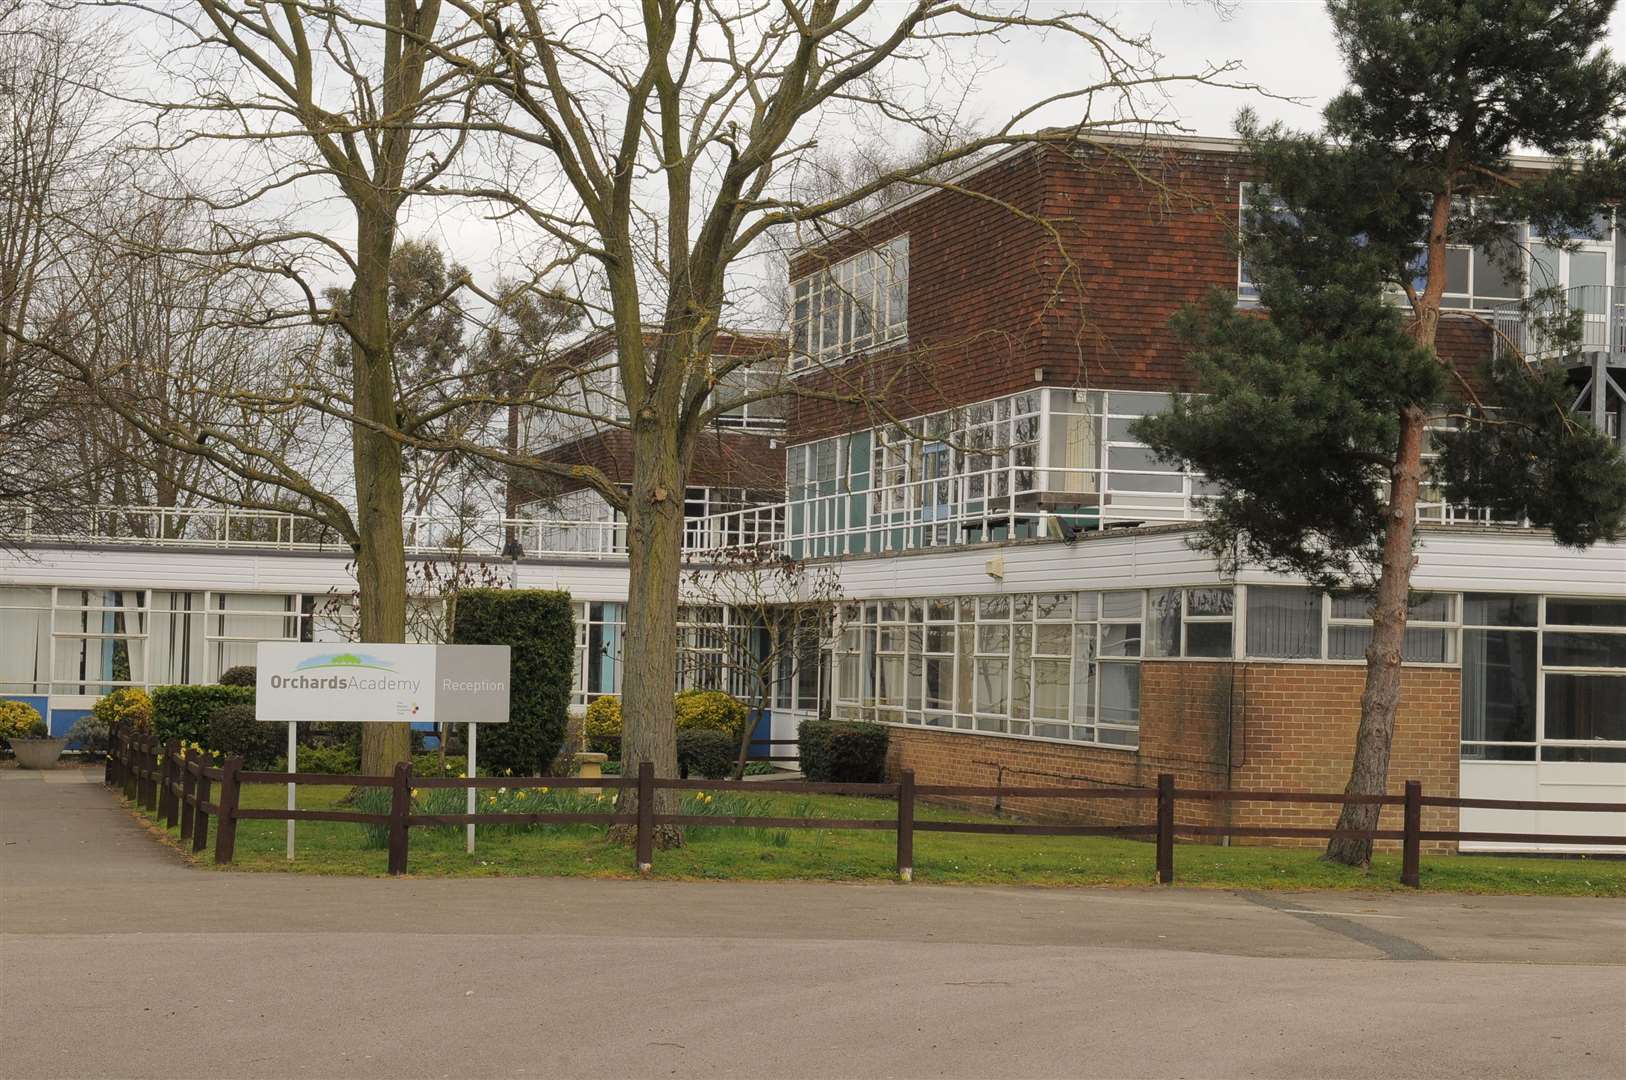 Orchards Academy, St Mary's Road, Swanley will receive a chunk of the government's £1bn fund to rebuild schools in England